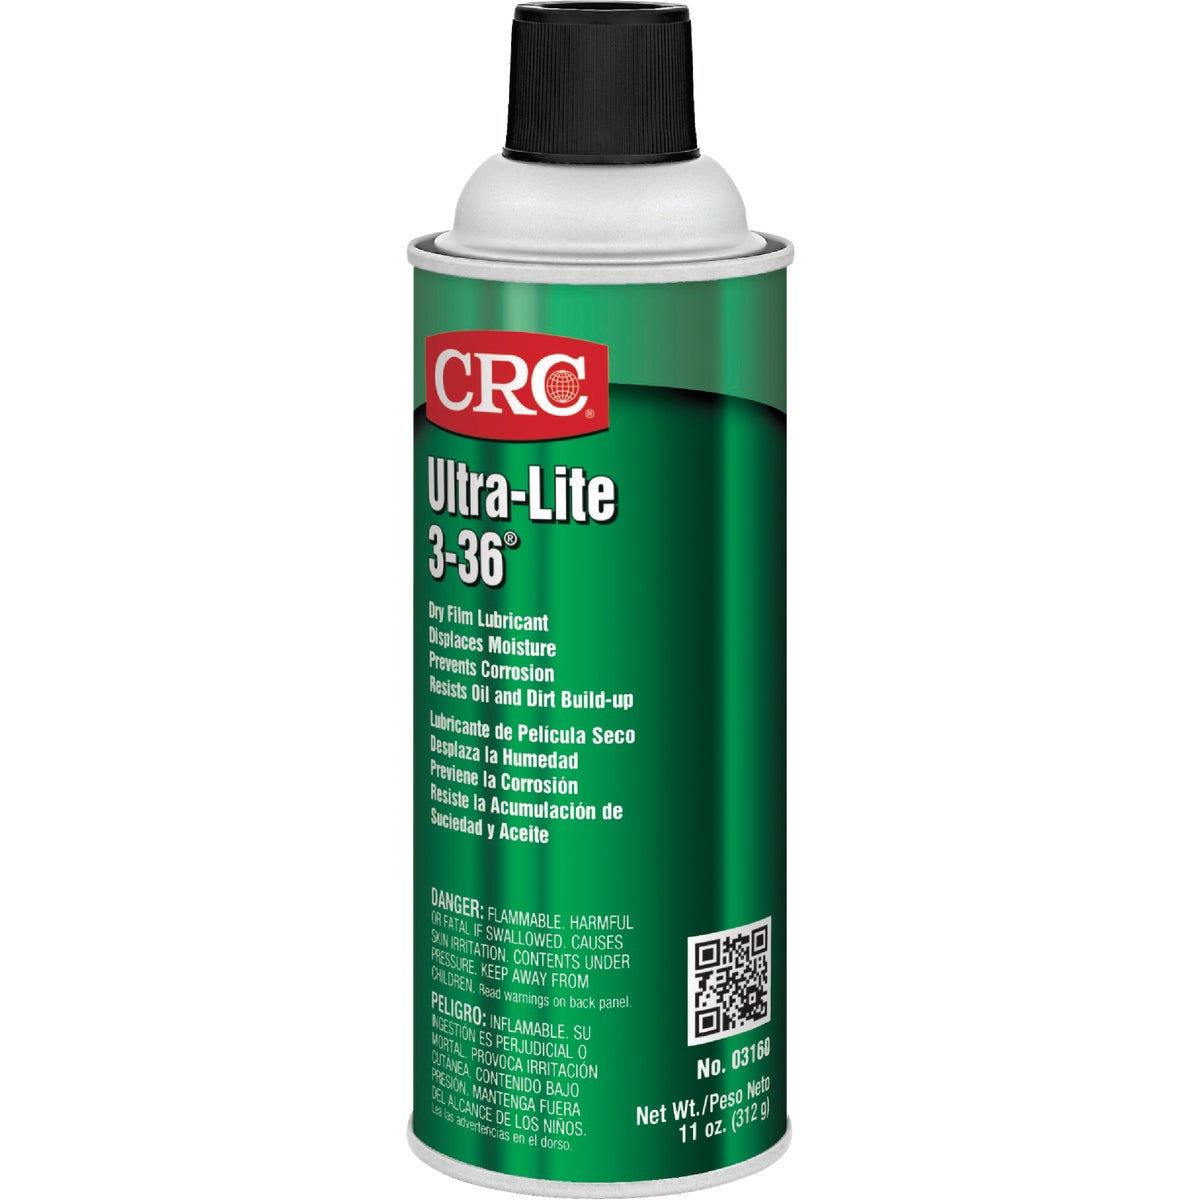 Item 574453, CRC Ultra-Lite 3-36 is a thin, oil-based nonstaining light-duty lubricant.